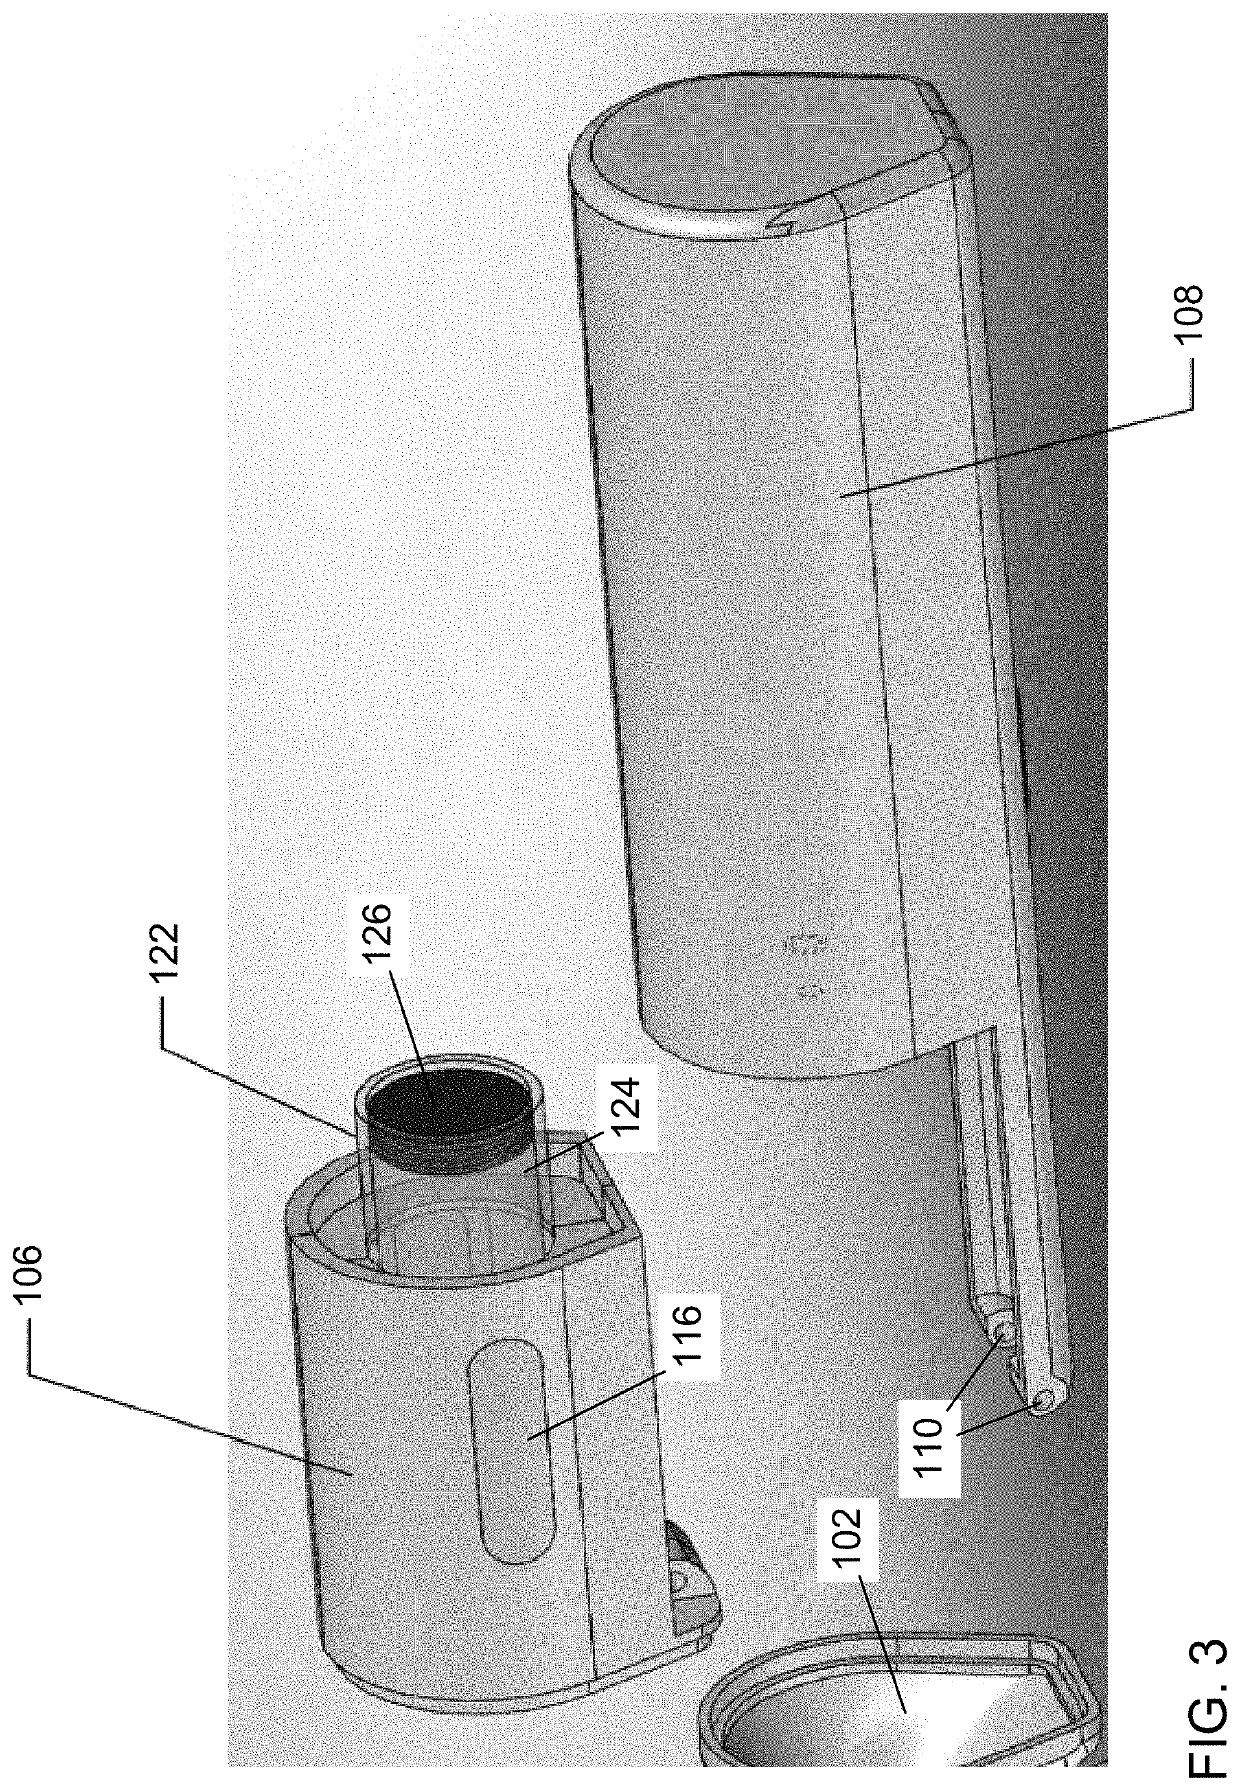 Liquid-filled cartridge for electronic device that produces an aerosol for inhalation by a person